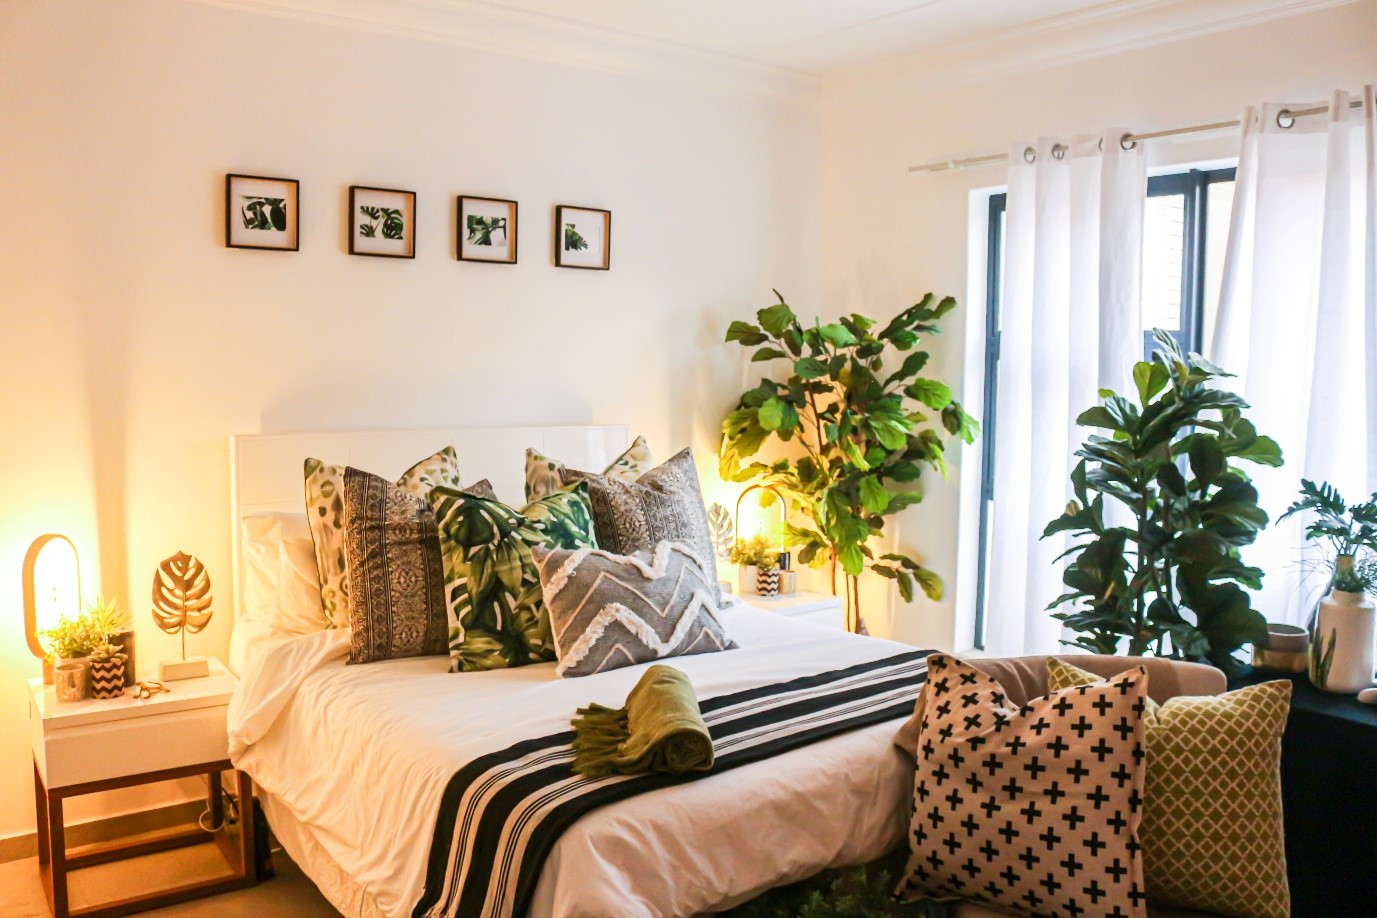 How to Create an Eco-Friendly Bedroom